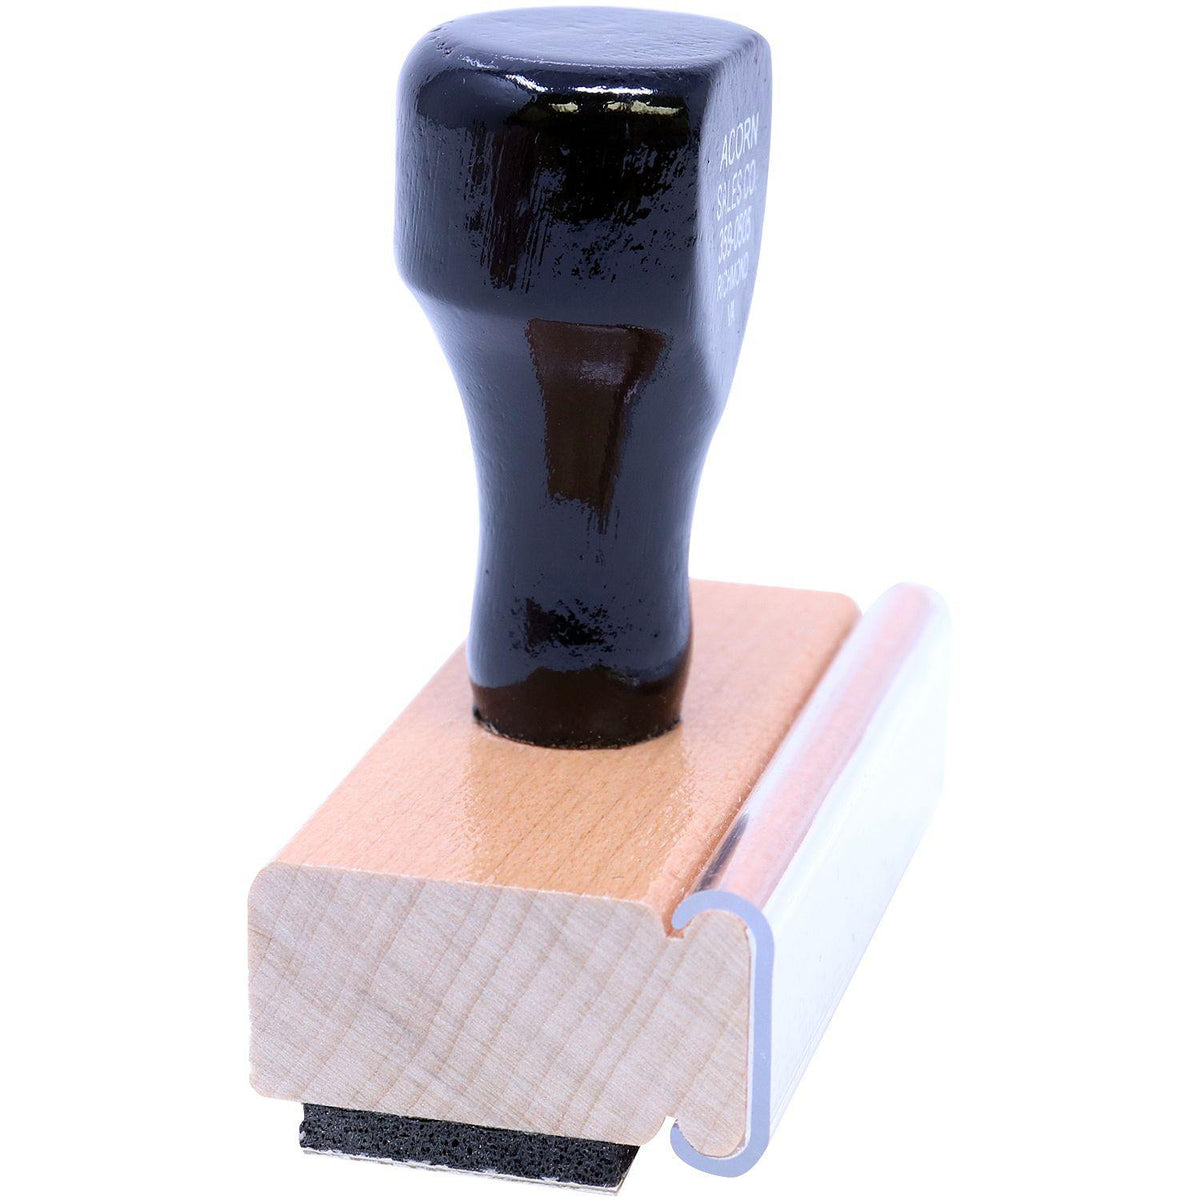 Side View of Large Orig1nal Rubber Stamp at an Angle